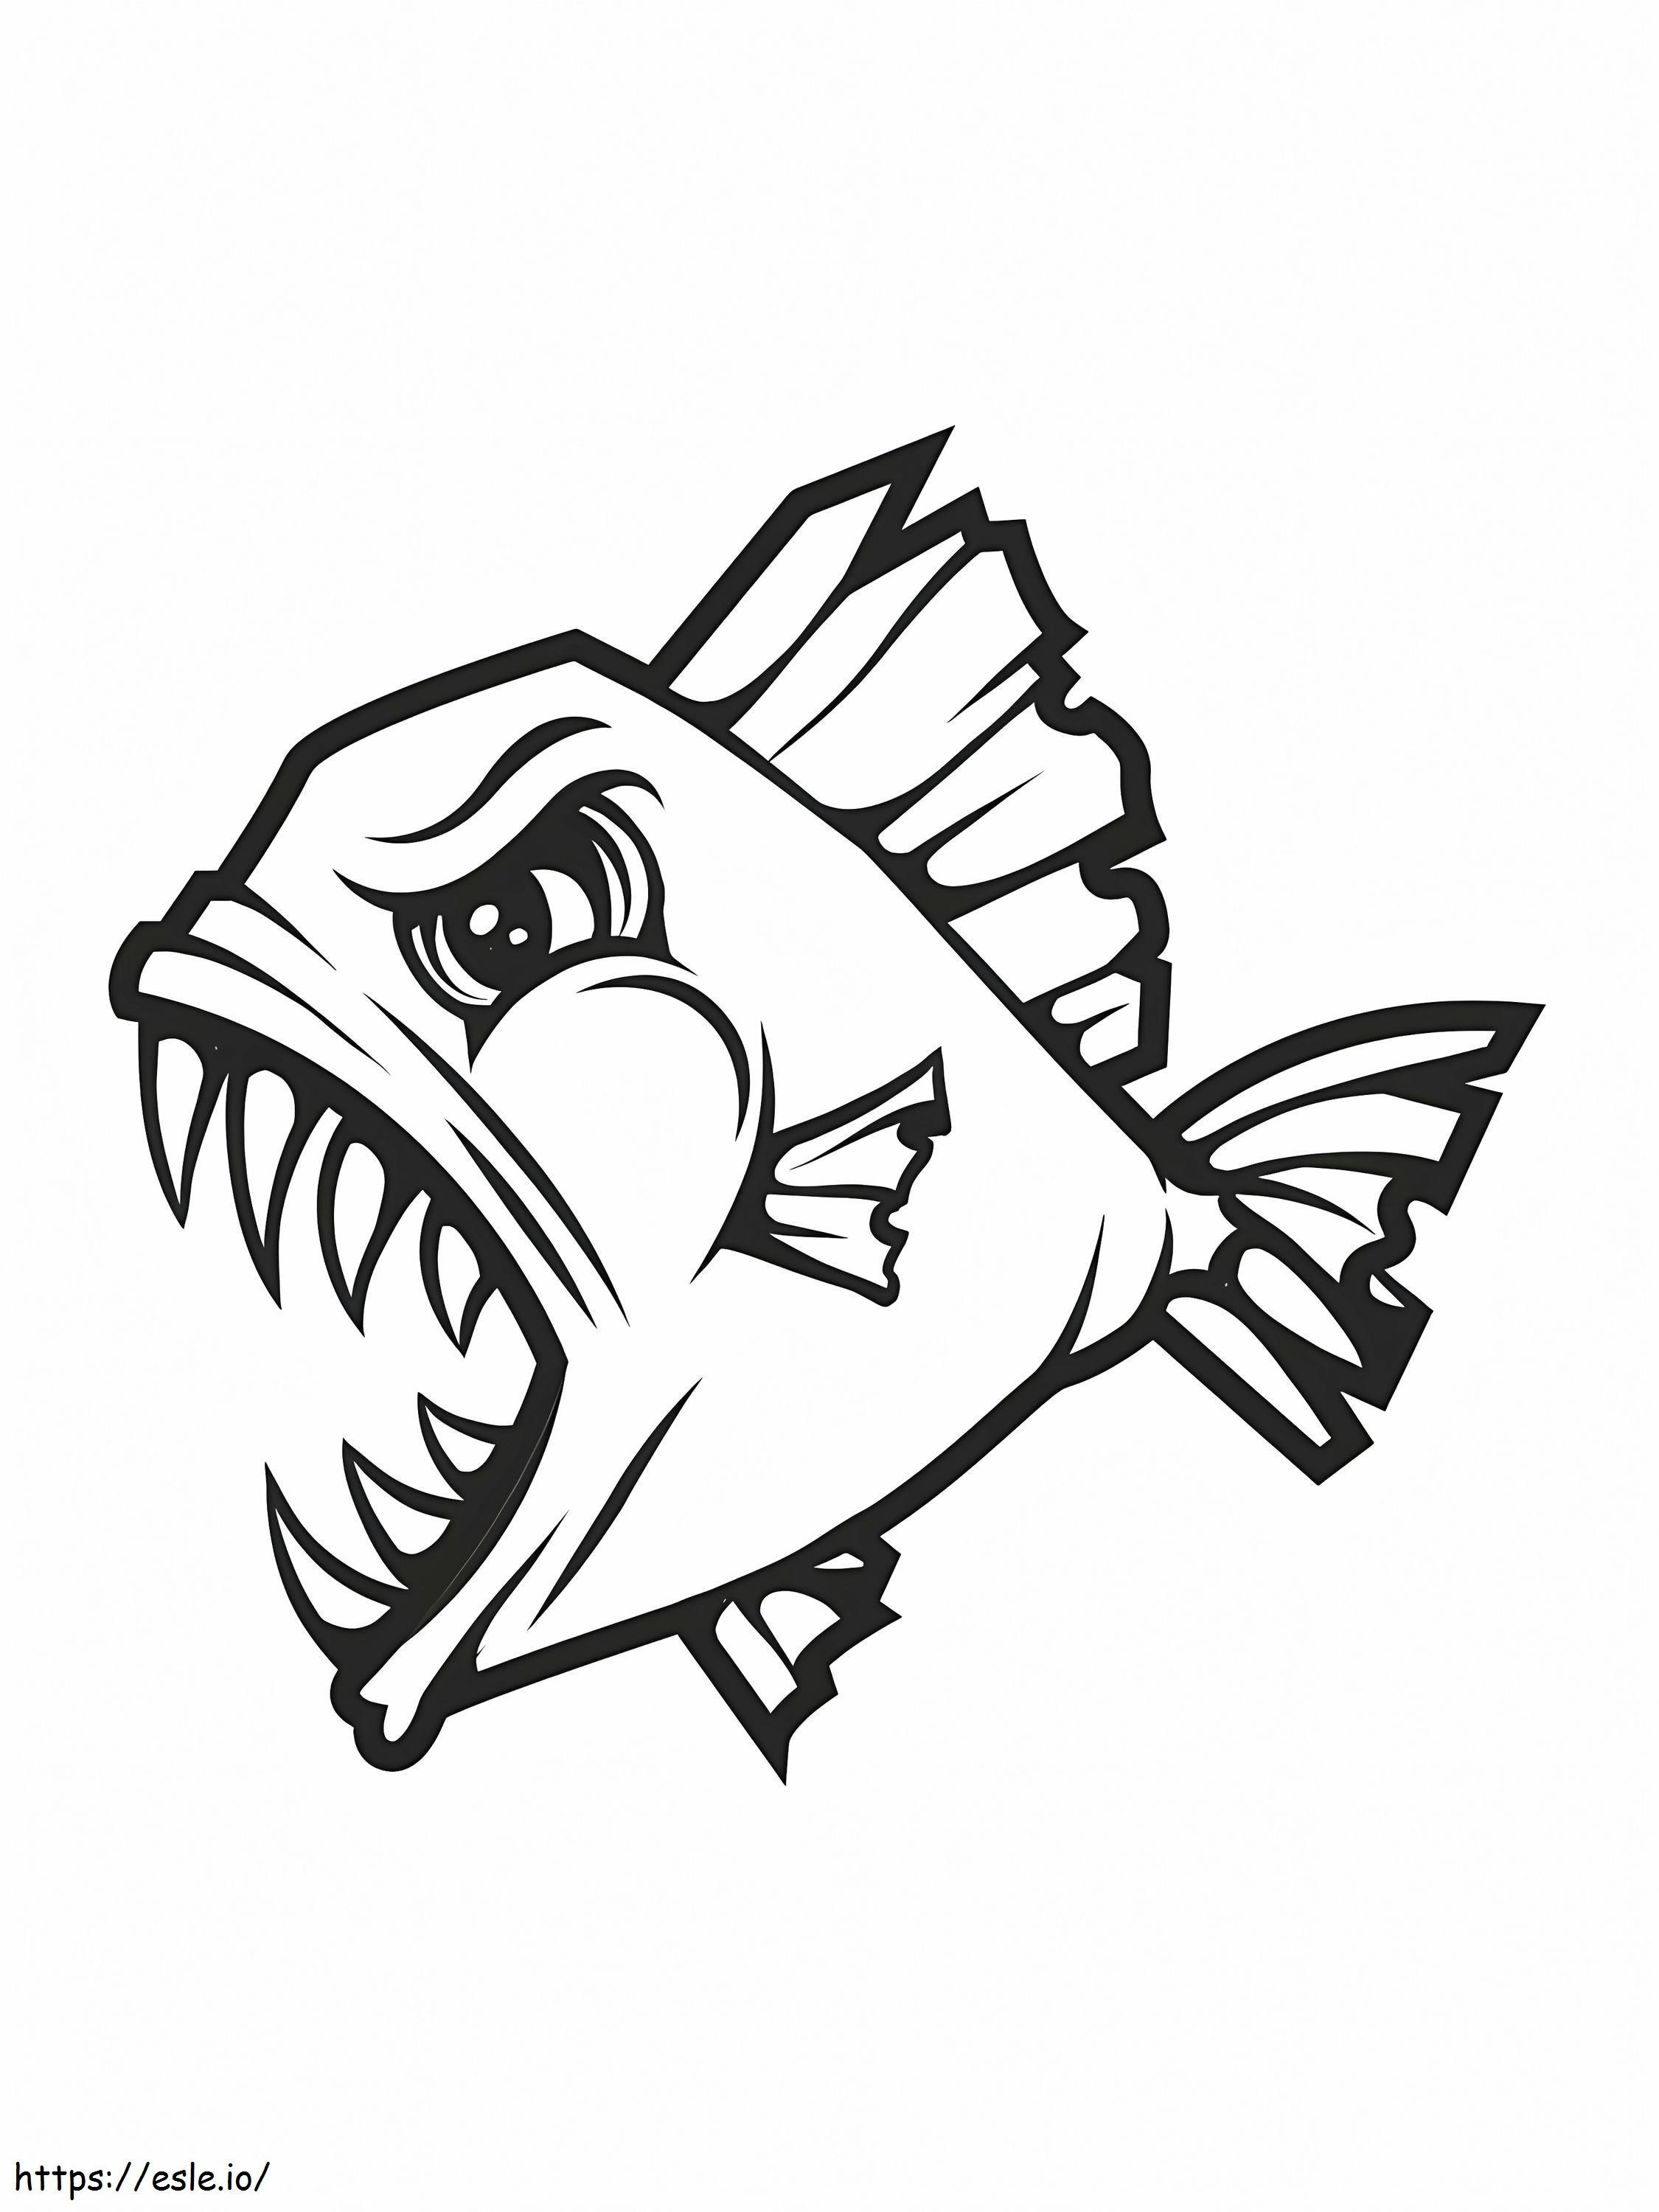 Hungry Piranha coloring page